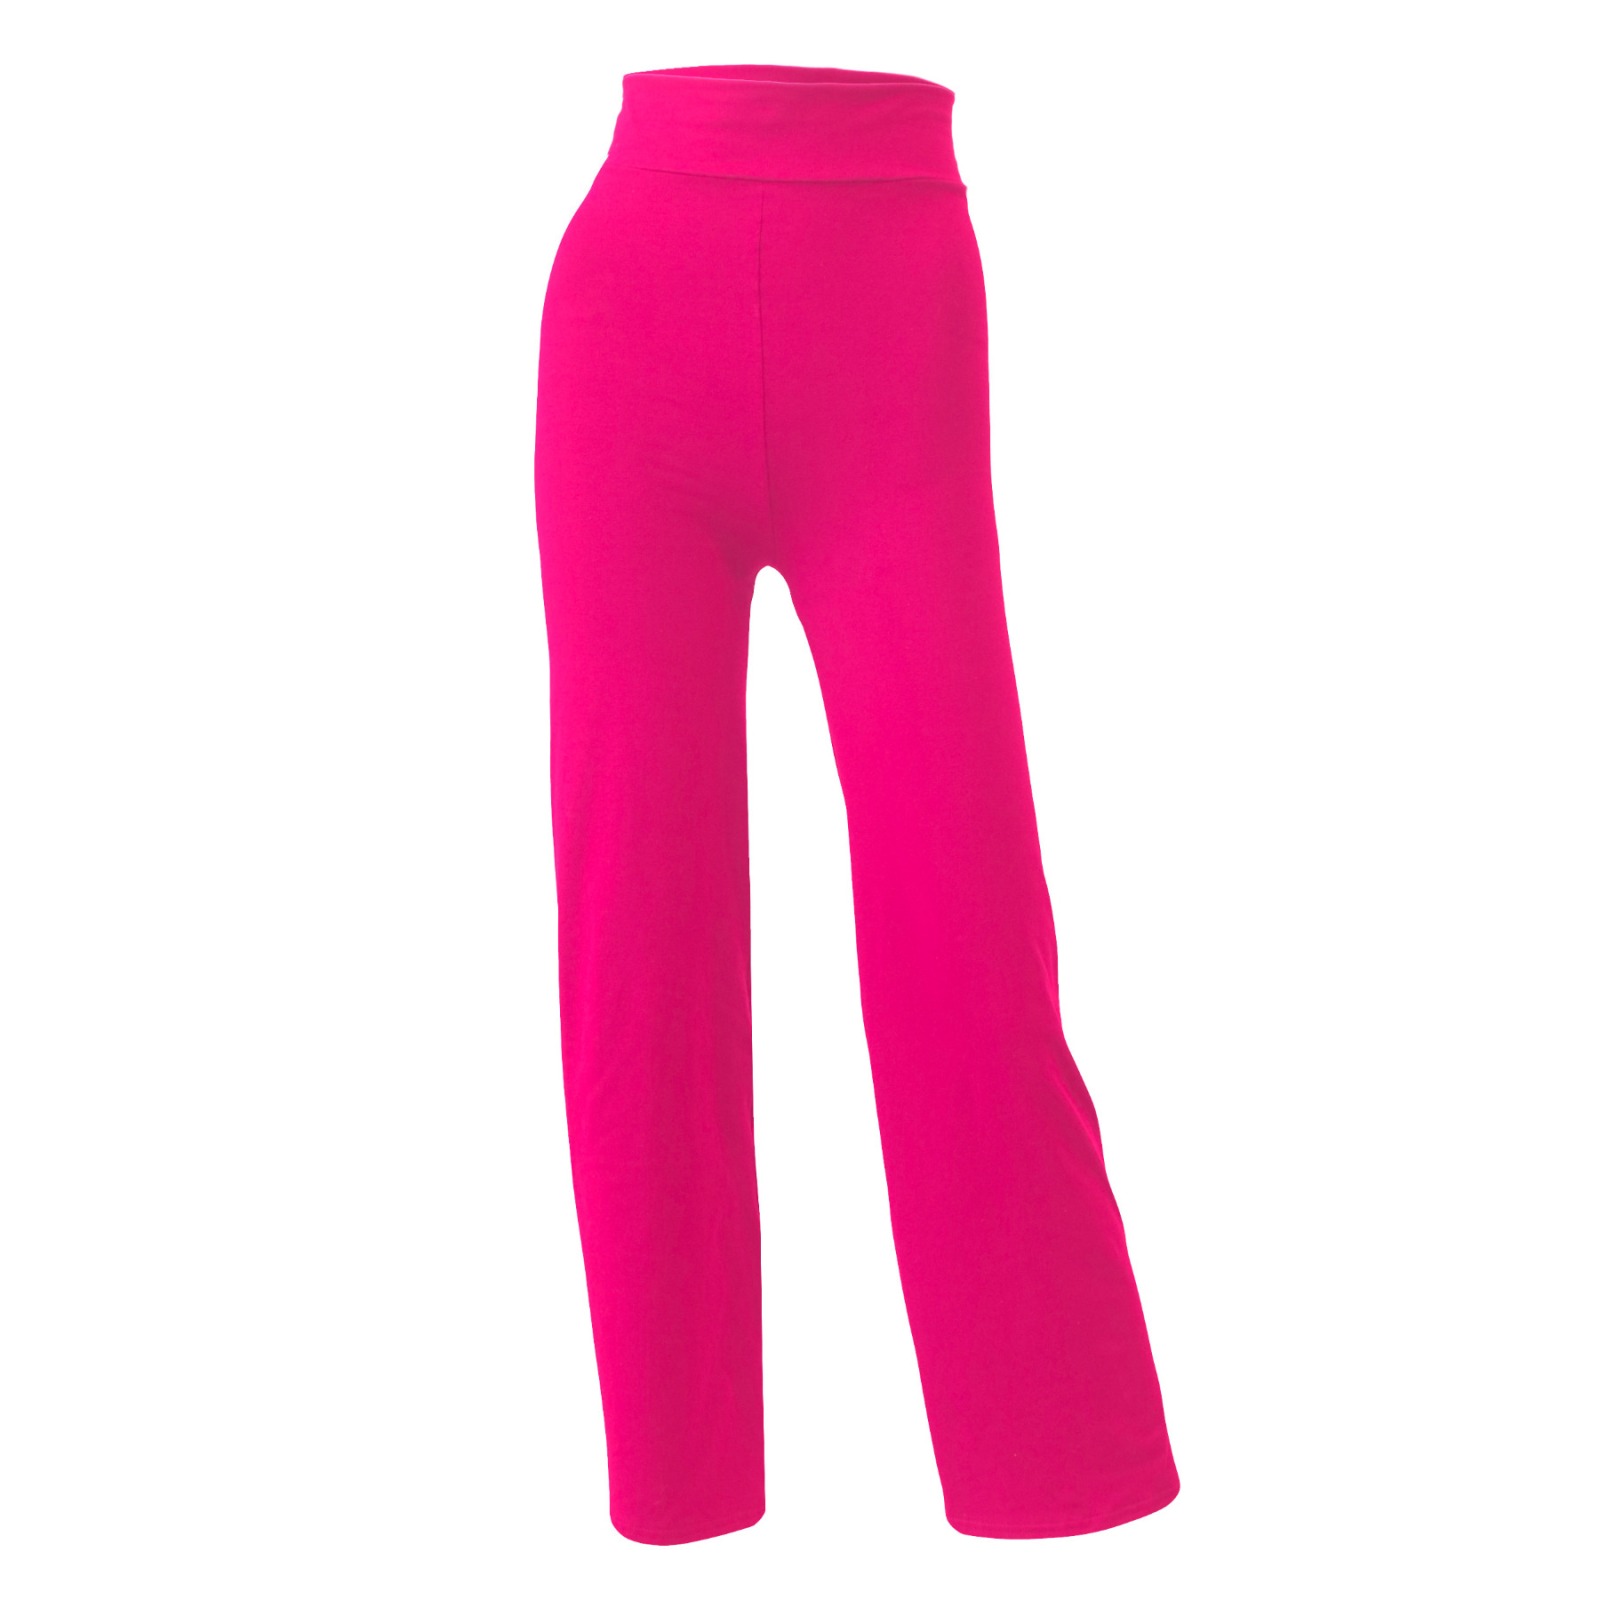 Yoga pants Relaxed Fit pink